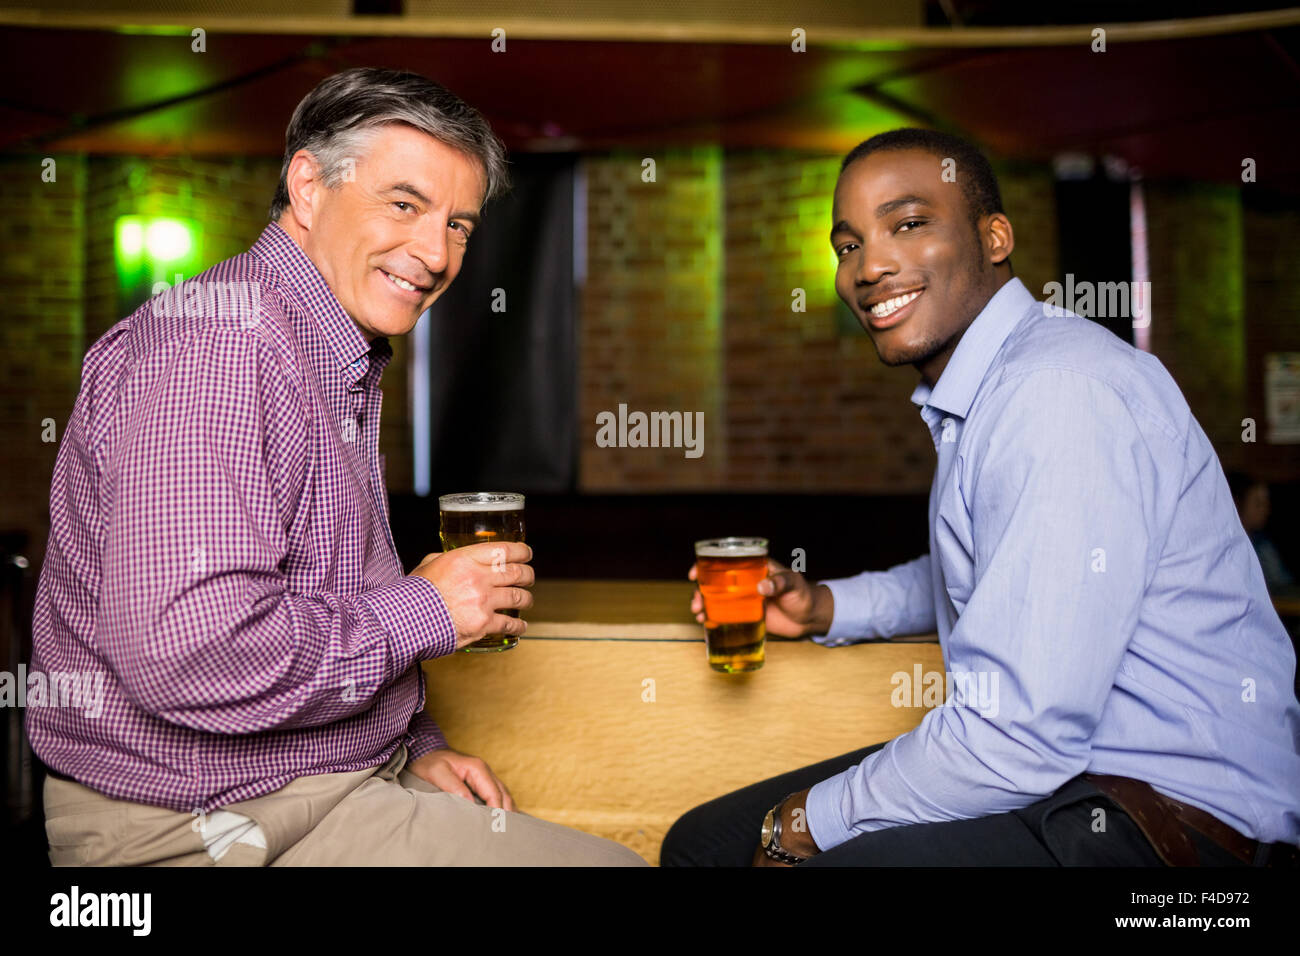 Smiling colleagues having a drink together Stock Photo